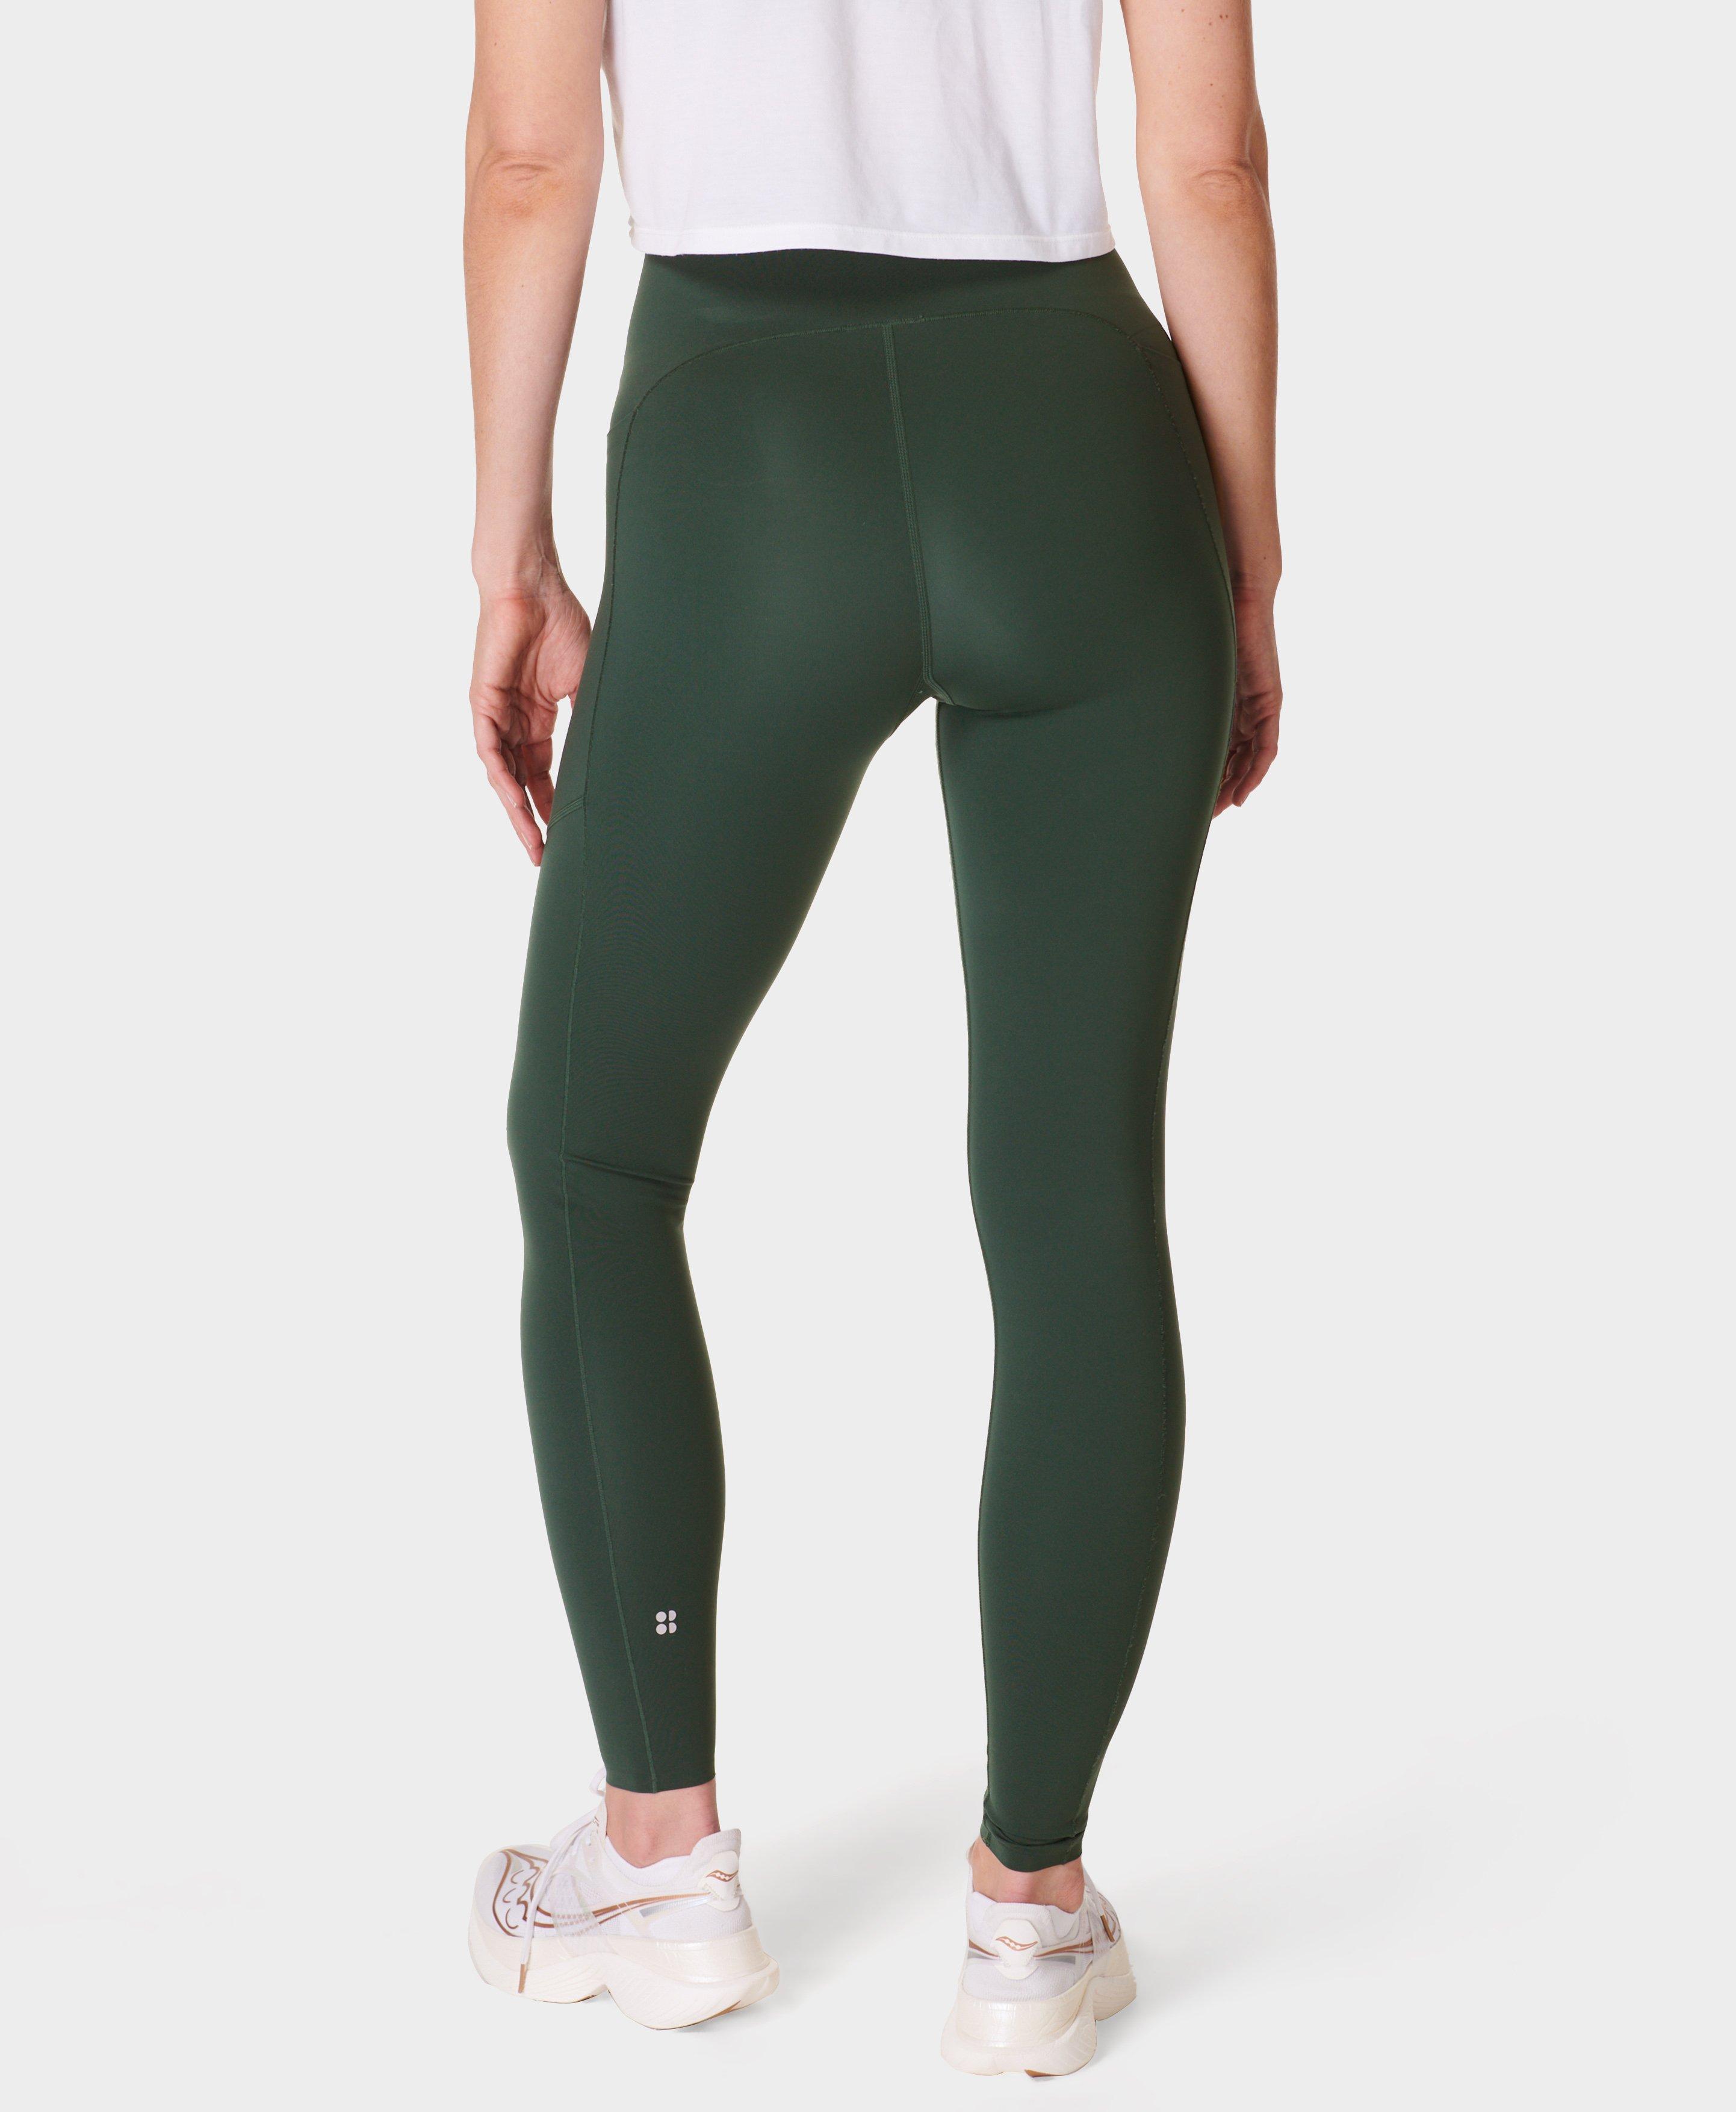 Women's Thick Seamfree Ruched Bum Power Gym Leggings